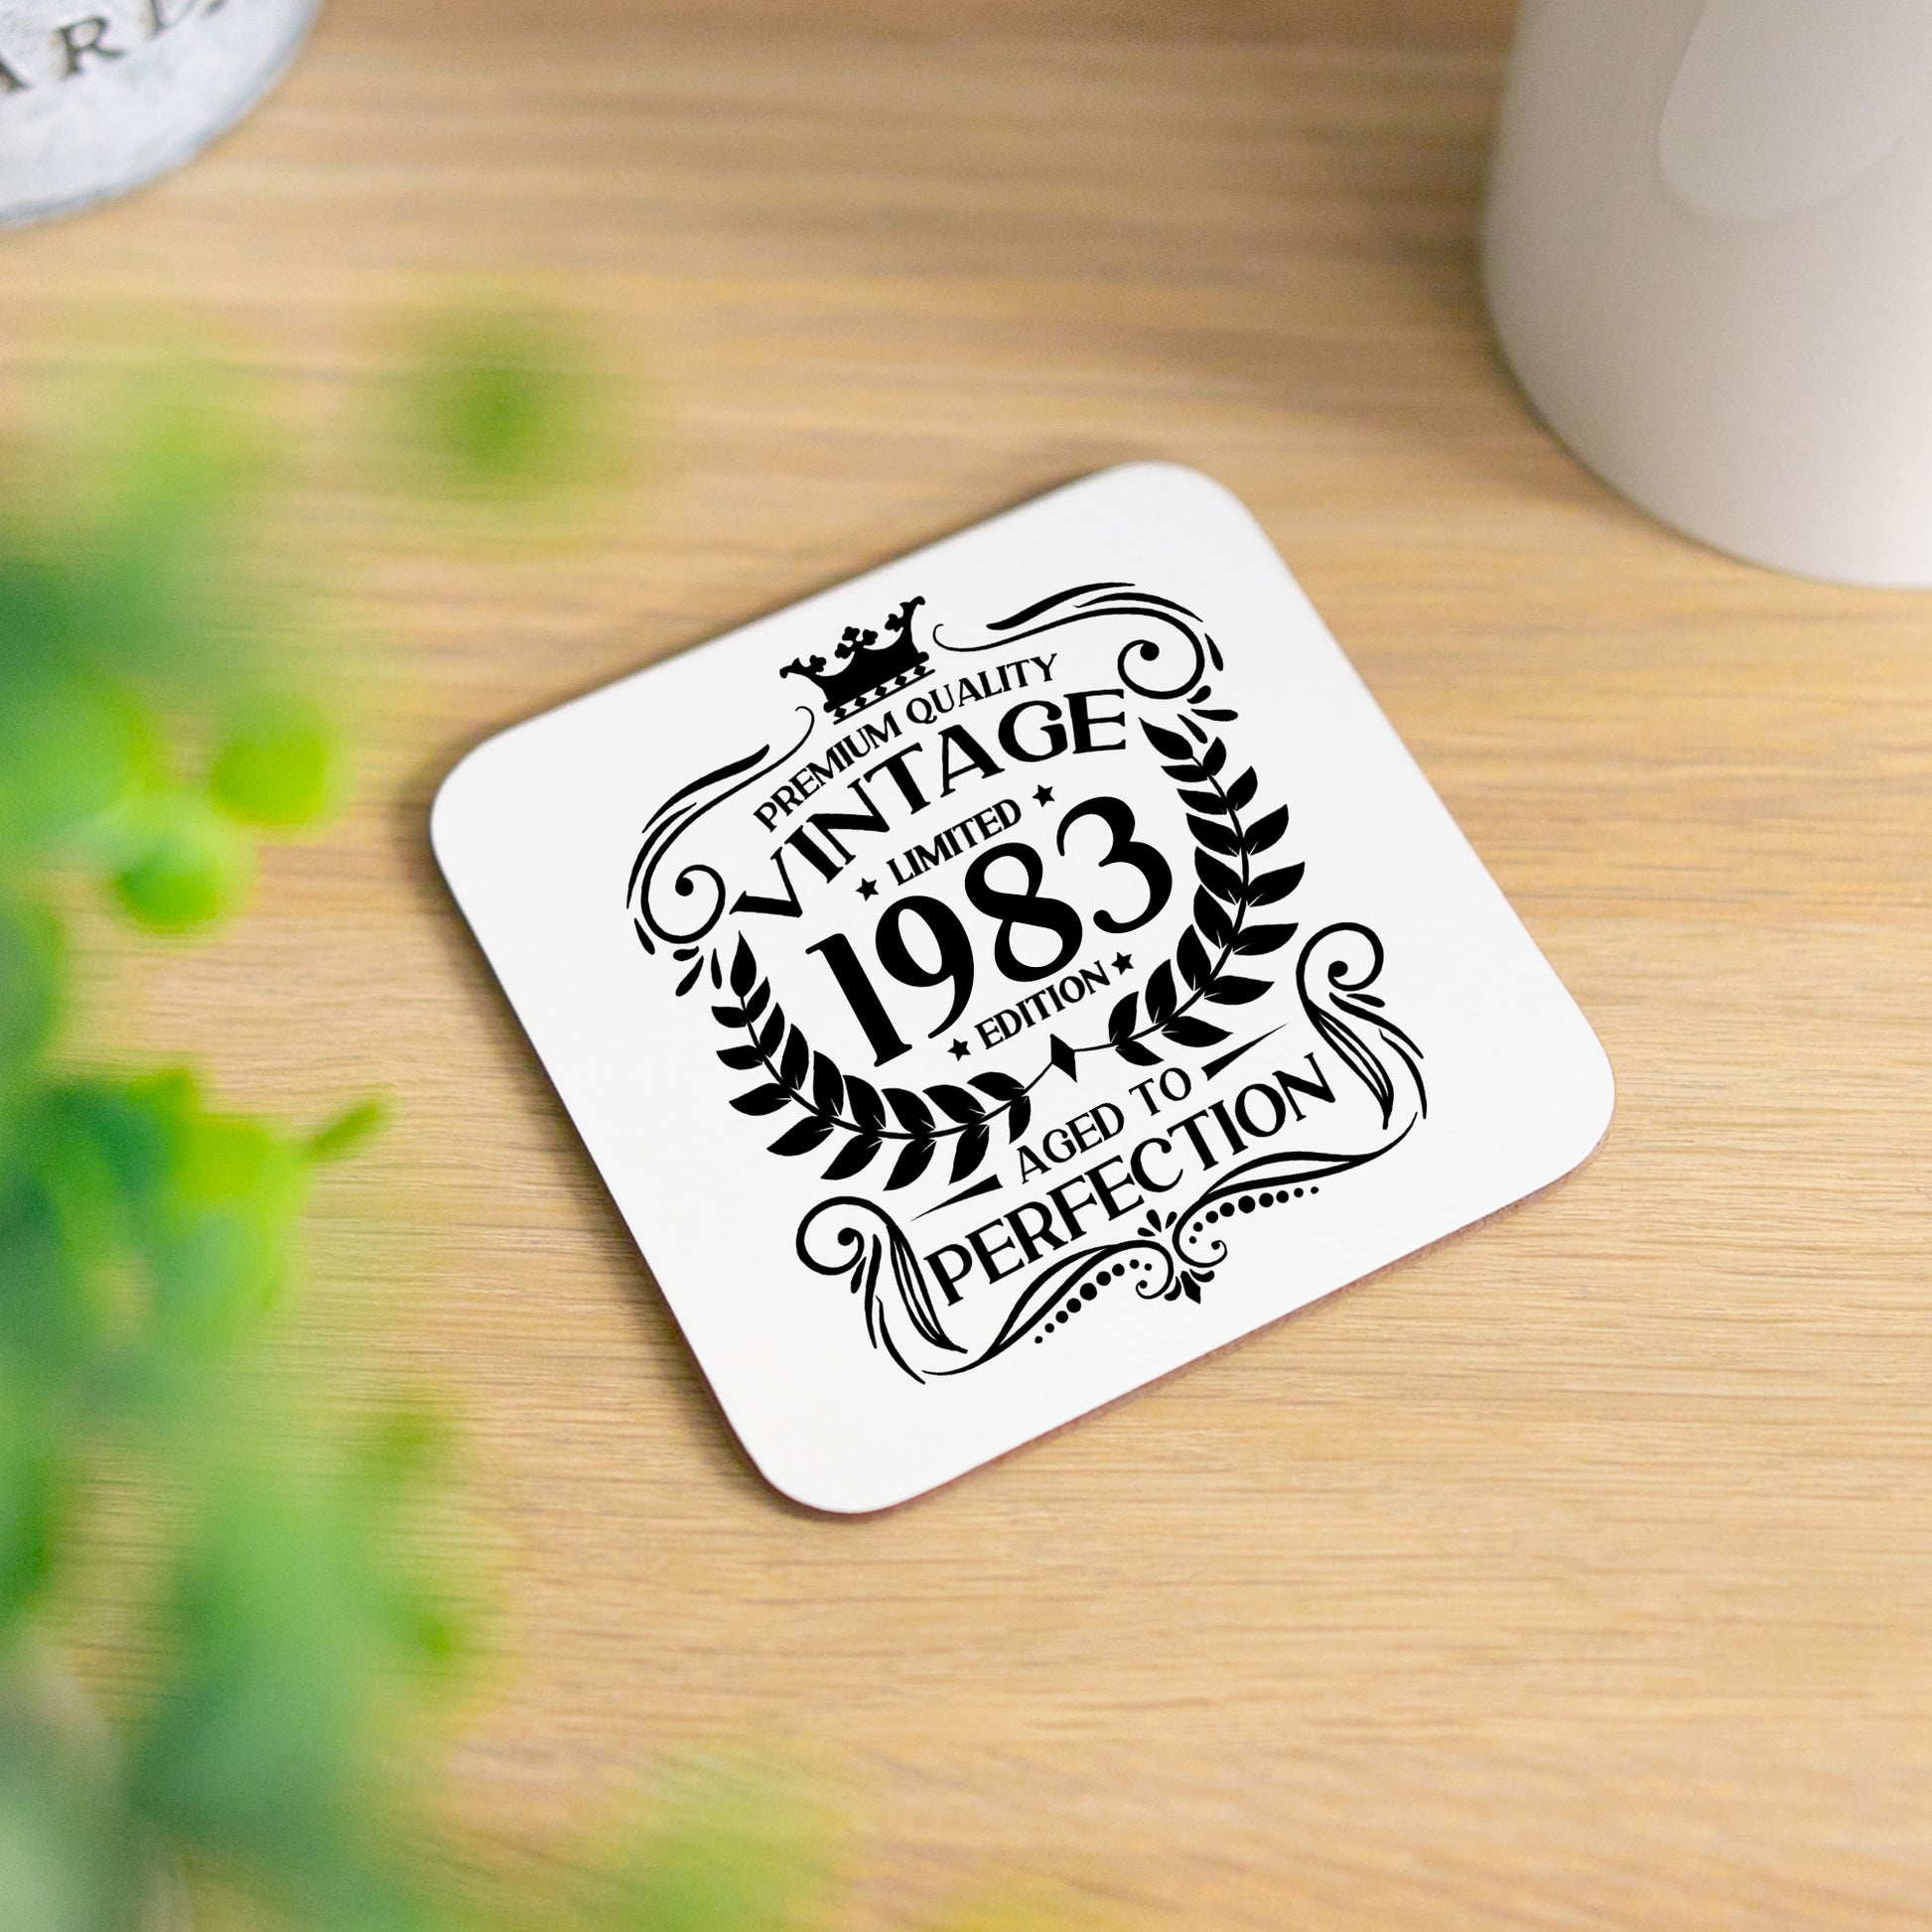 Vintage 1983 40th Birthday Engraved Gin Glass Gift  - Always Looking Good - Glass & Printed Coaster  